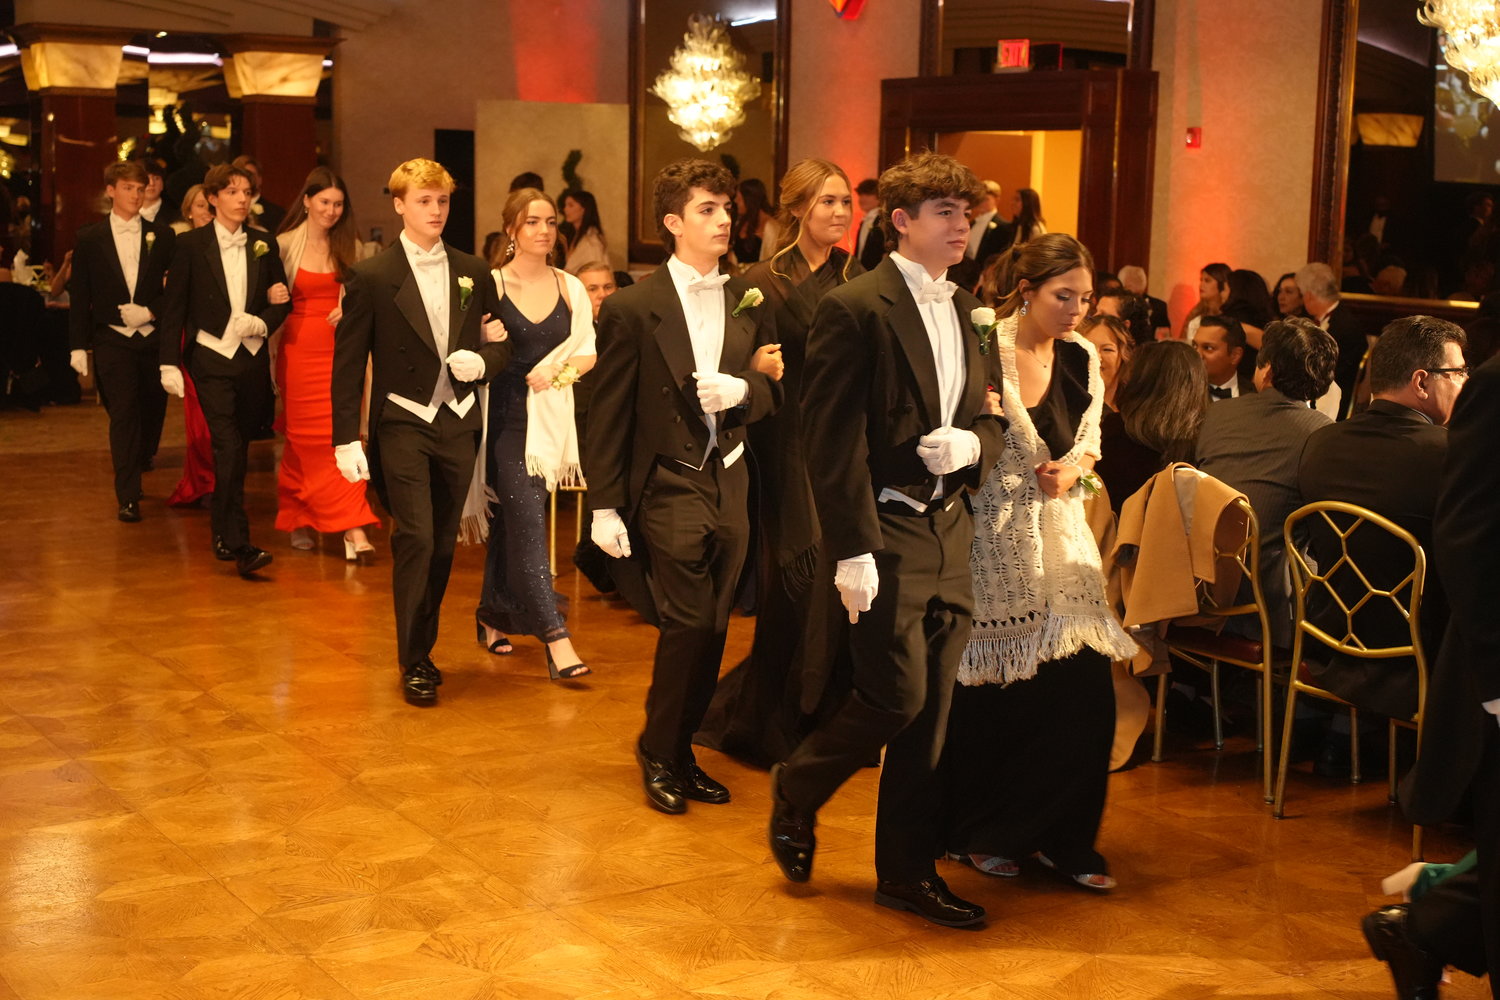 One of the many annual traditions at the Mercy Ball is the honor guard, comprised of high school students who escort the Grand March of dignitaries into the ballroom for the event.